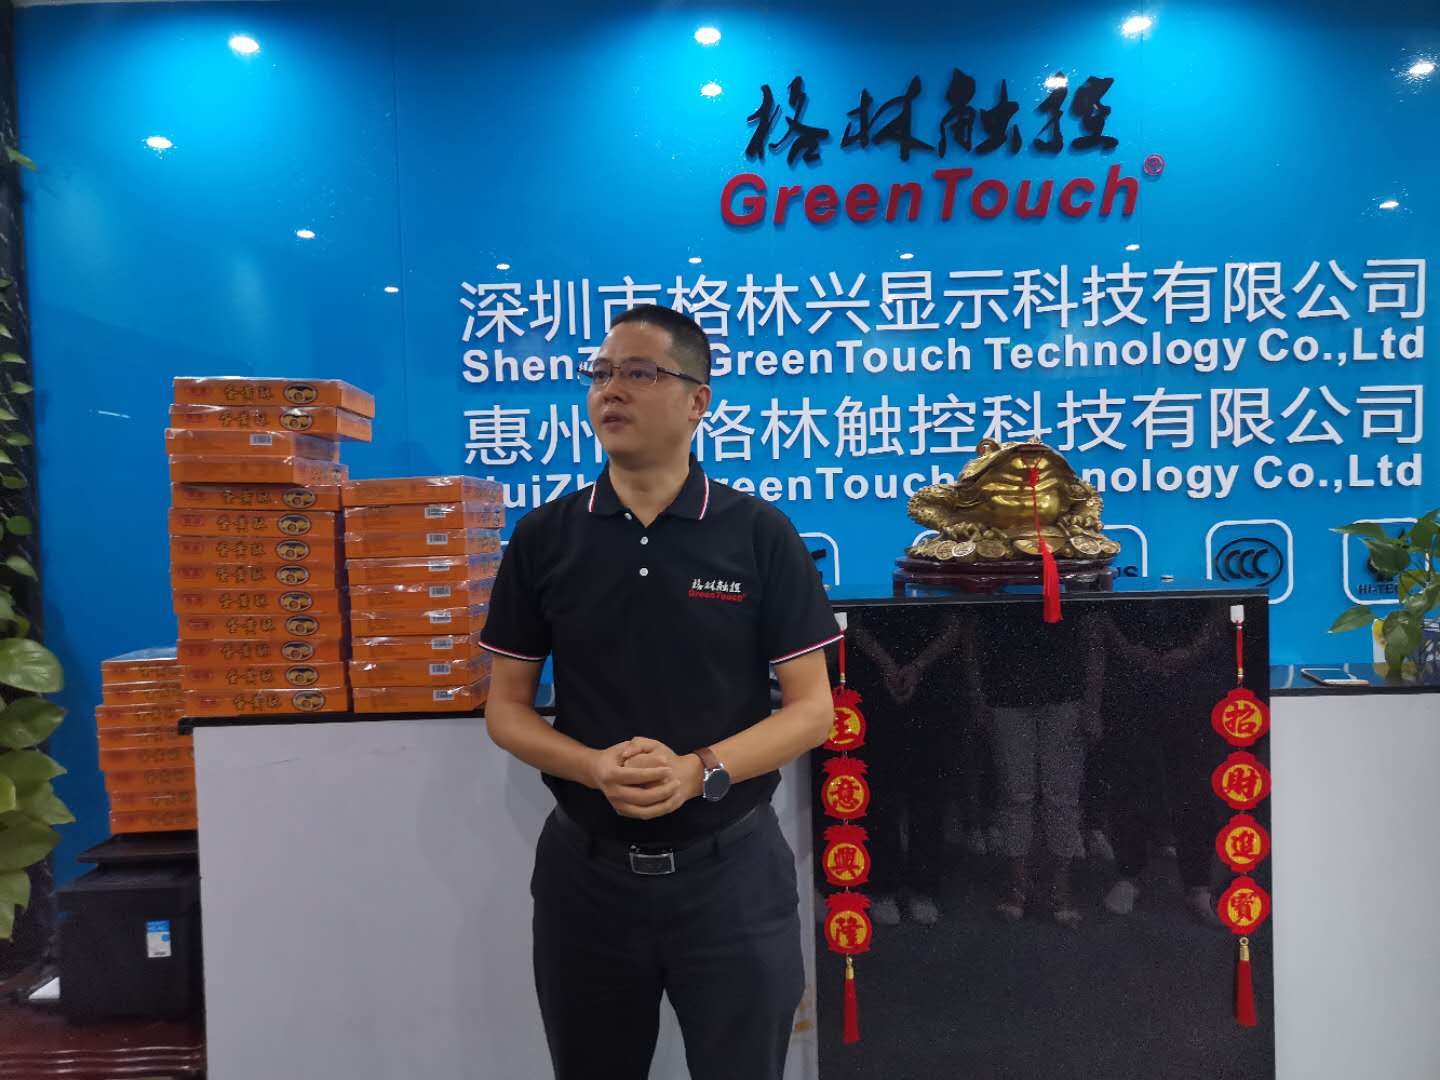 On September 24, 2020, the company will distribute moon cakes to all employees